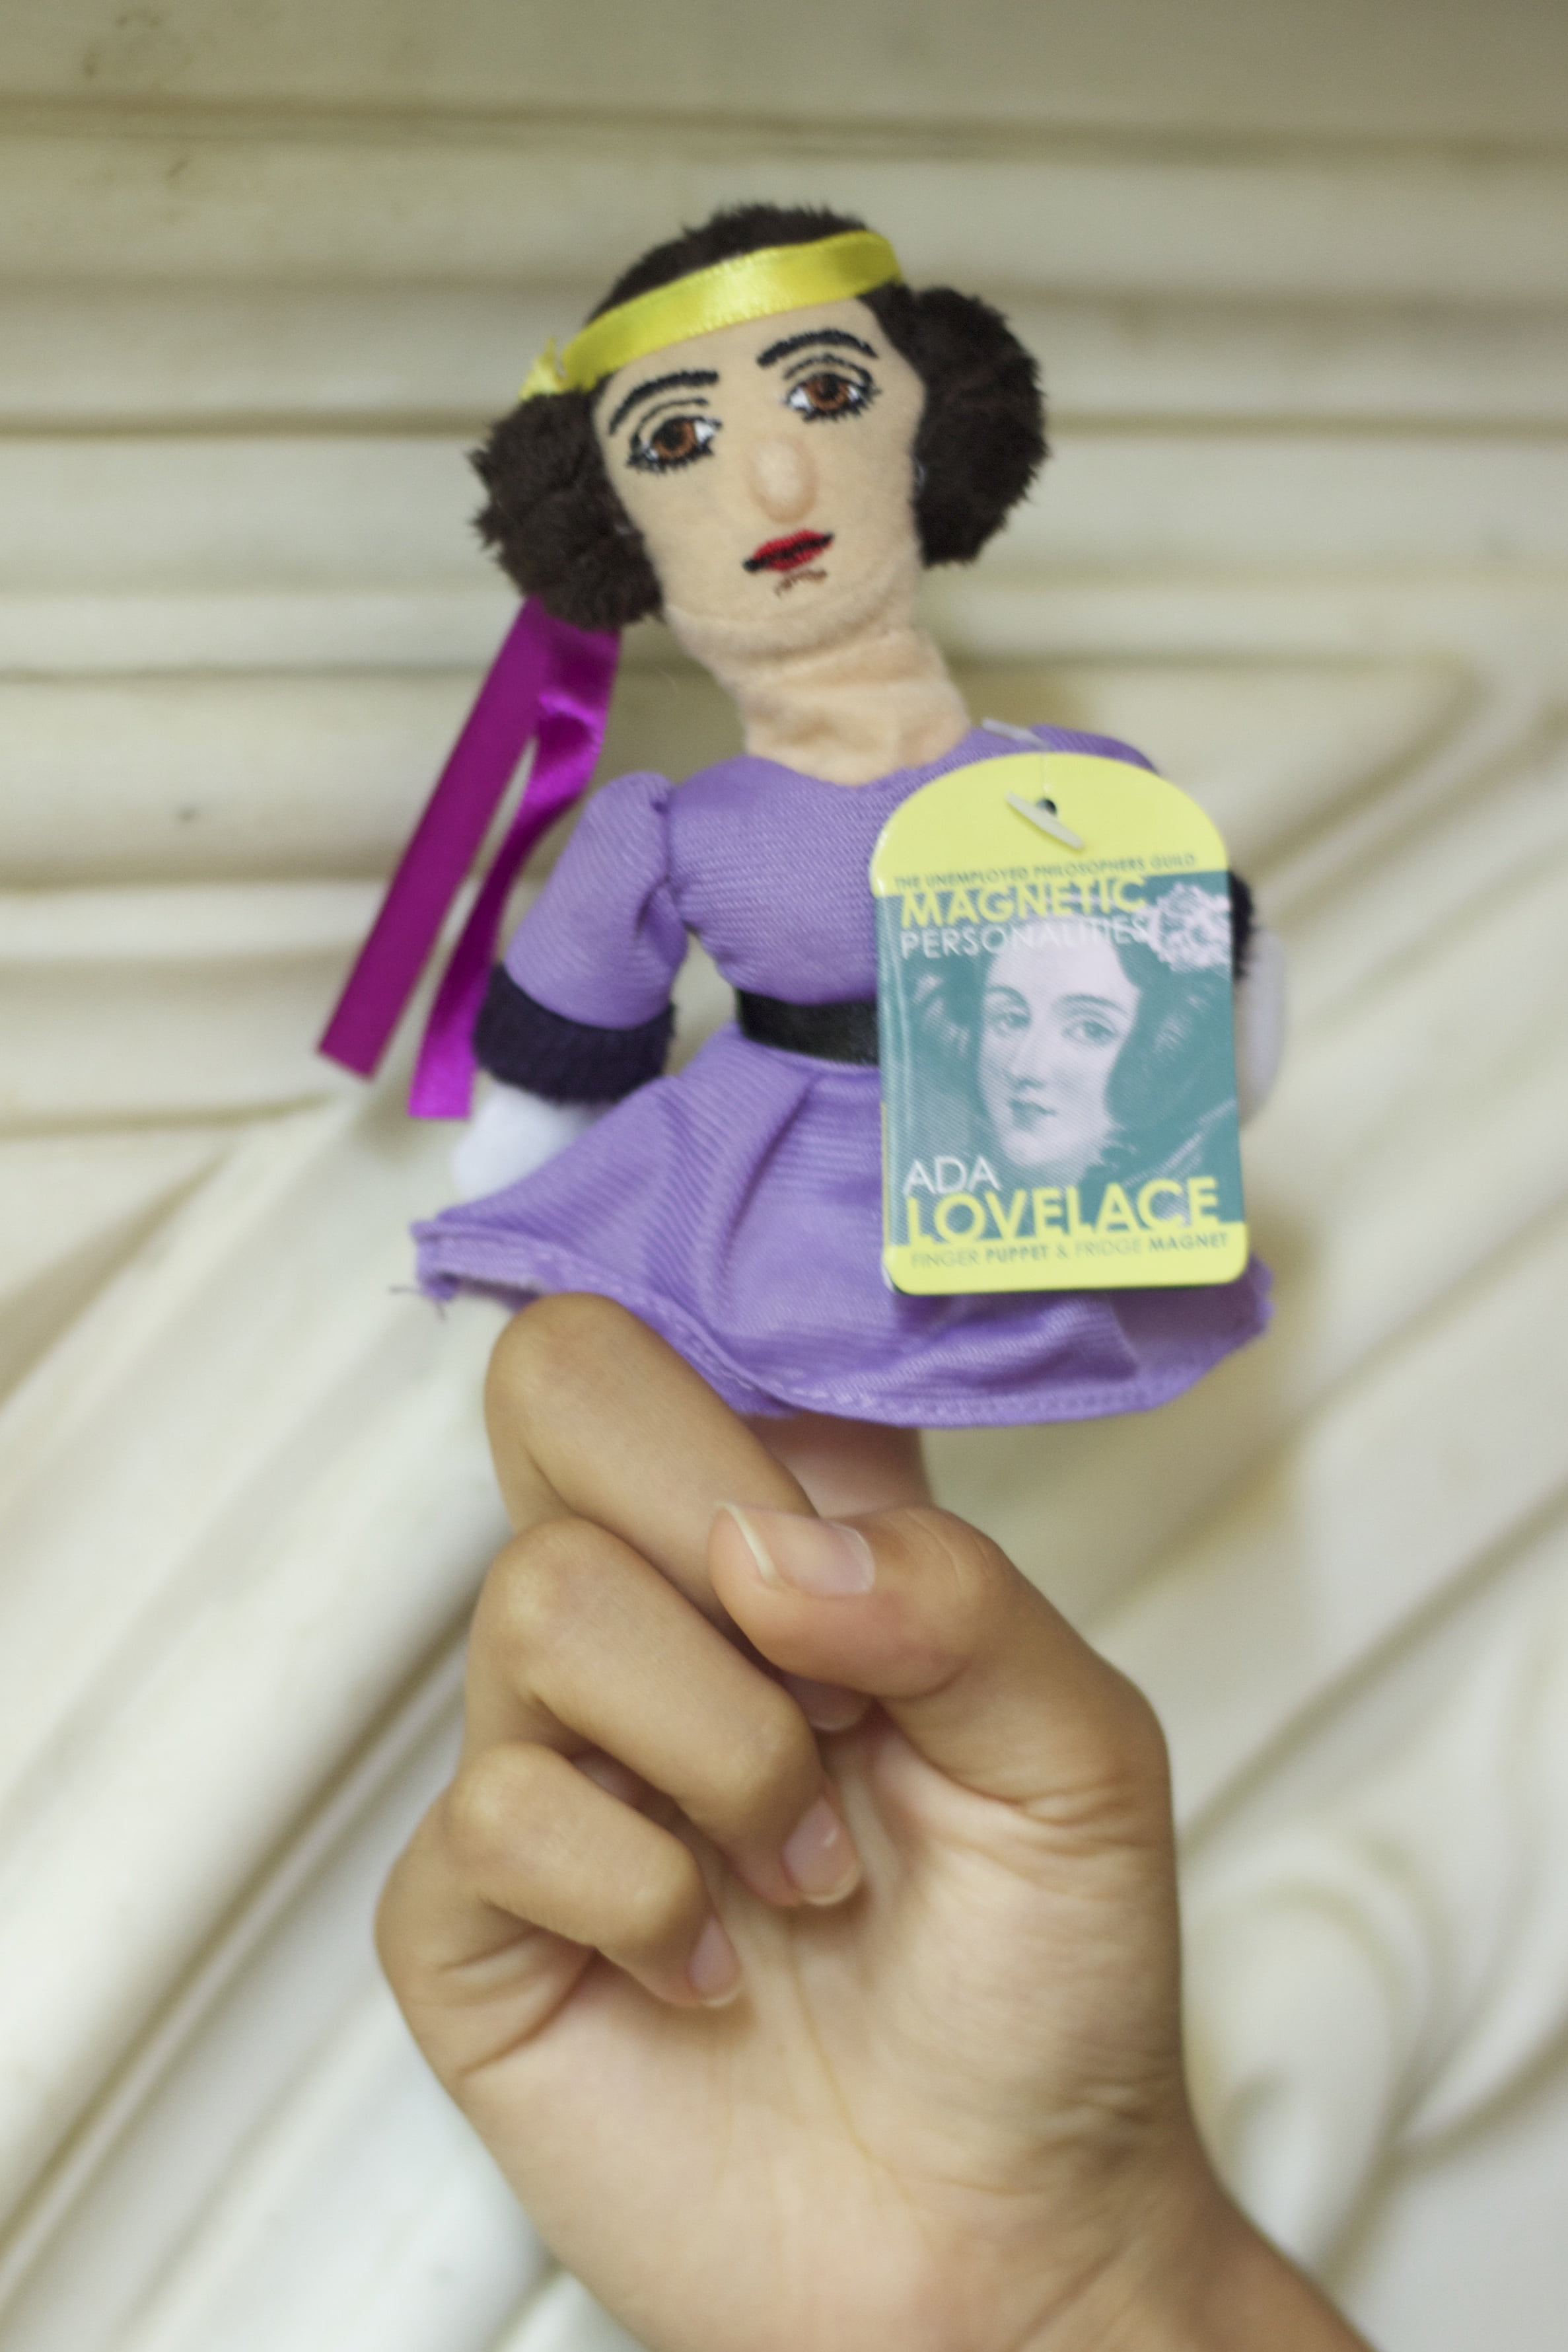 Ada Lovelace Finger Puppet and Refrigerator Magnet for Kids and Adults